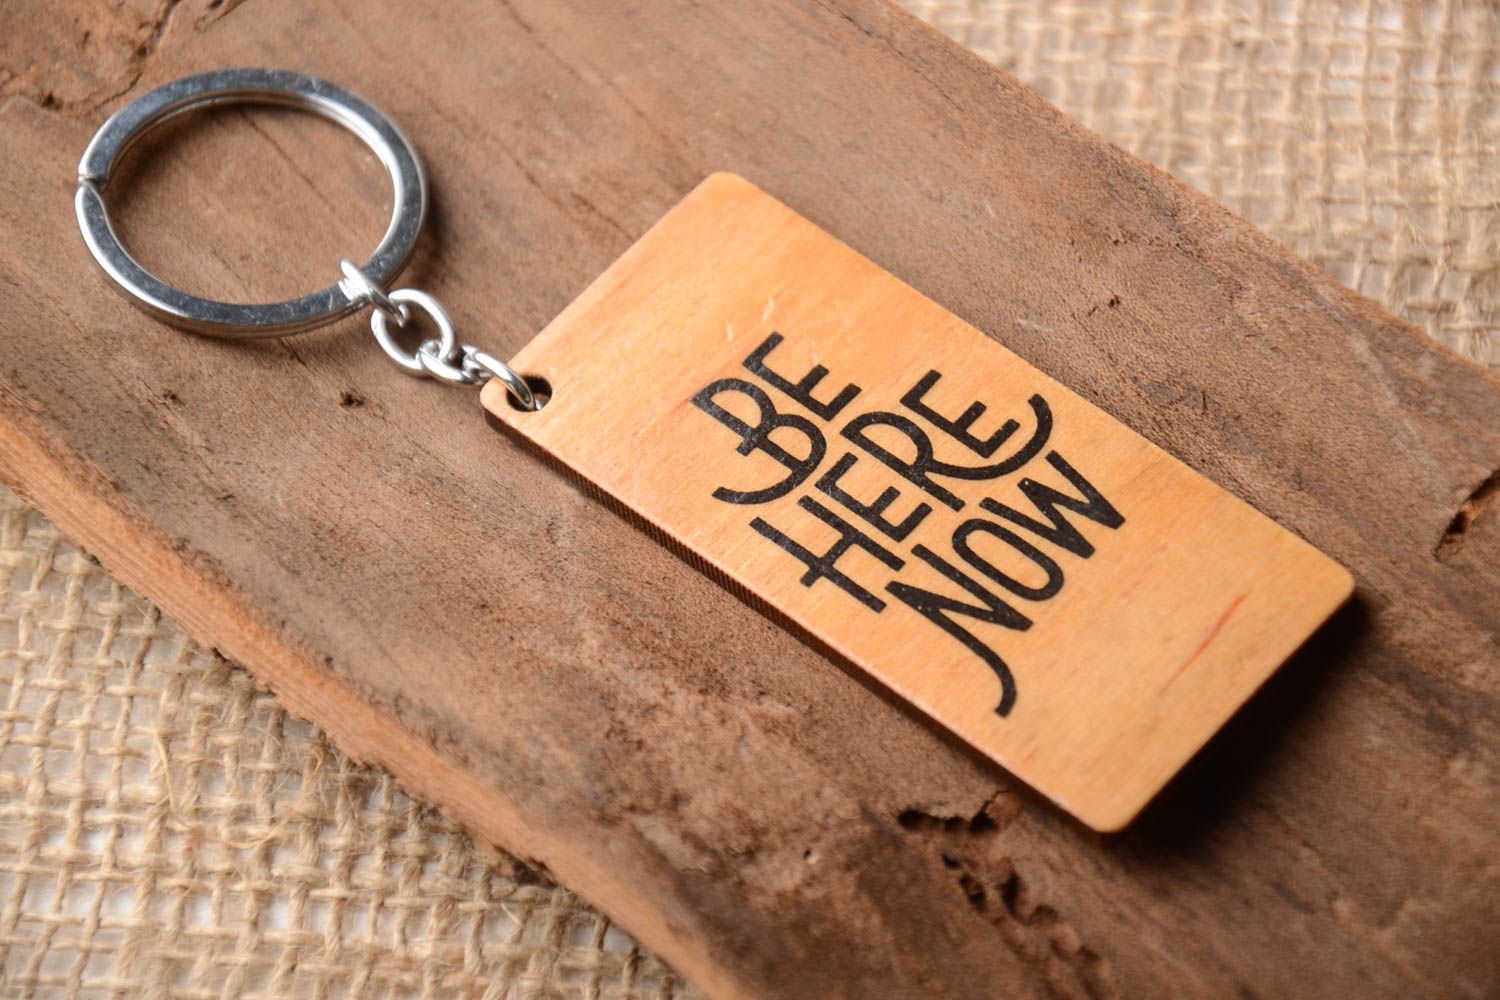 Handmade wooden keychain key rings wooden accessories souvenir ideas cool gifts photo 1